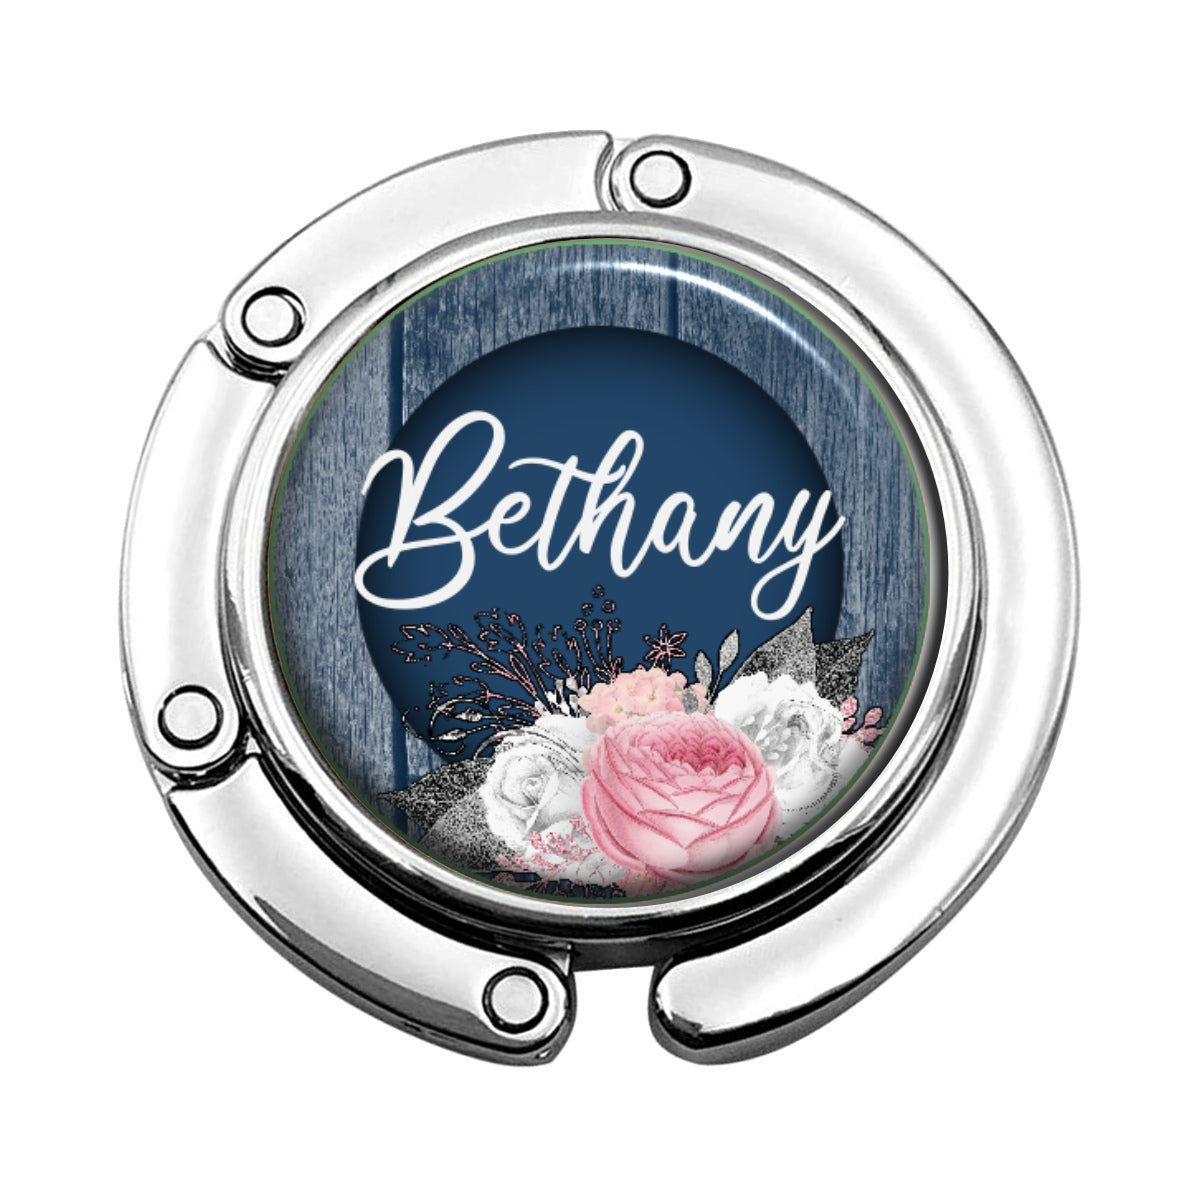 a badge with a picture of a woman and flowers on it